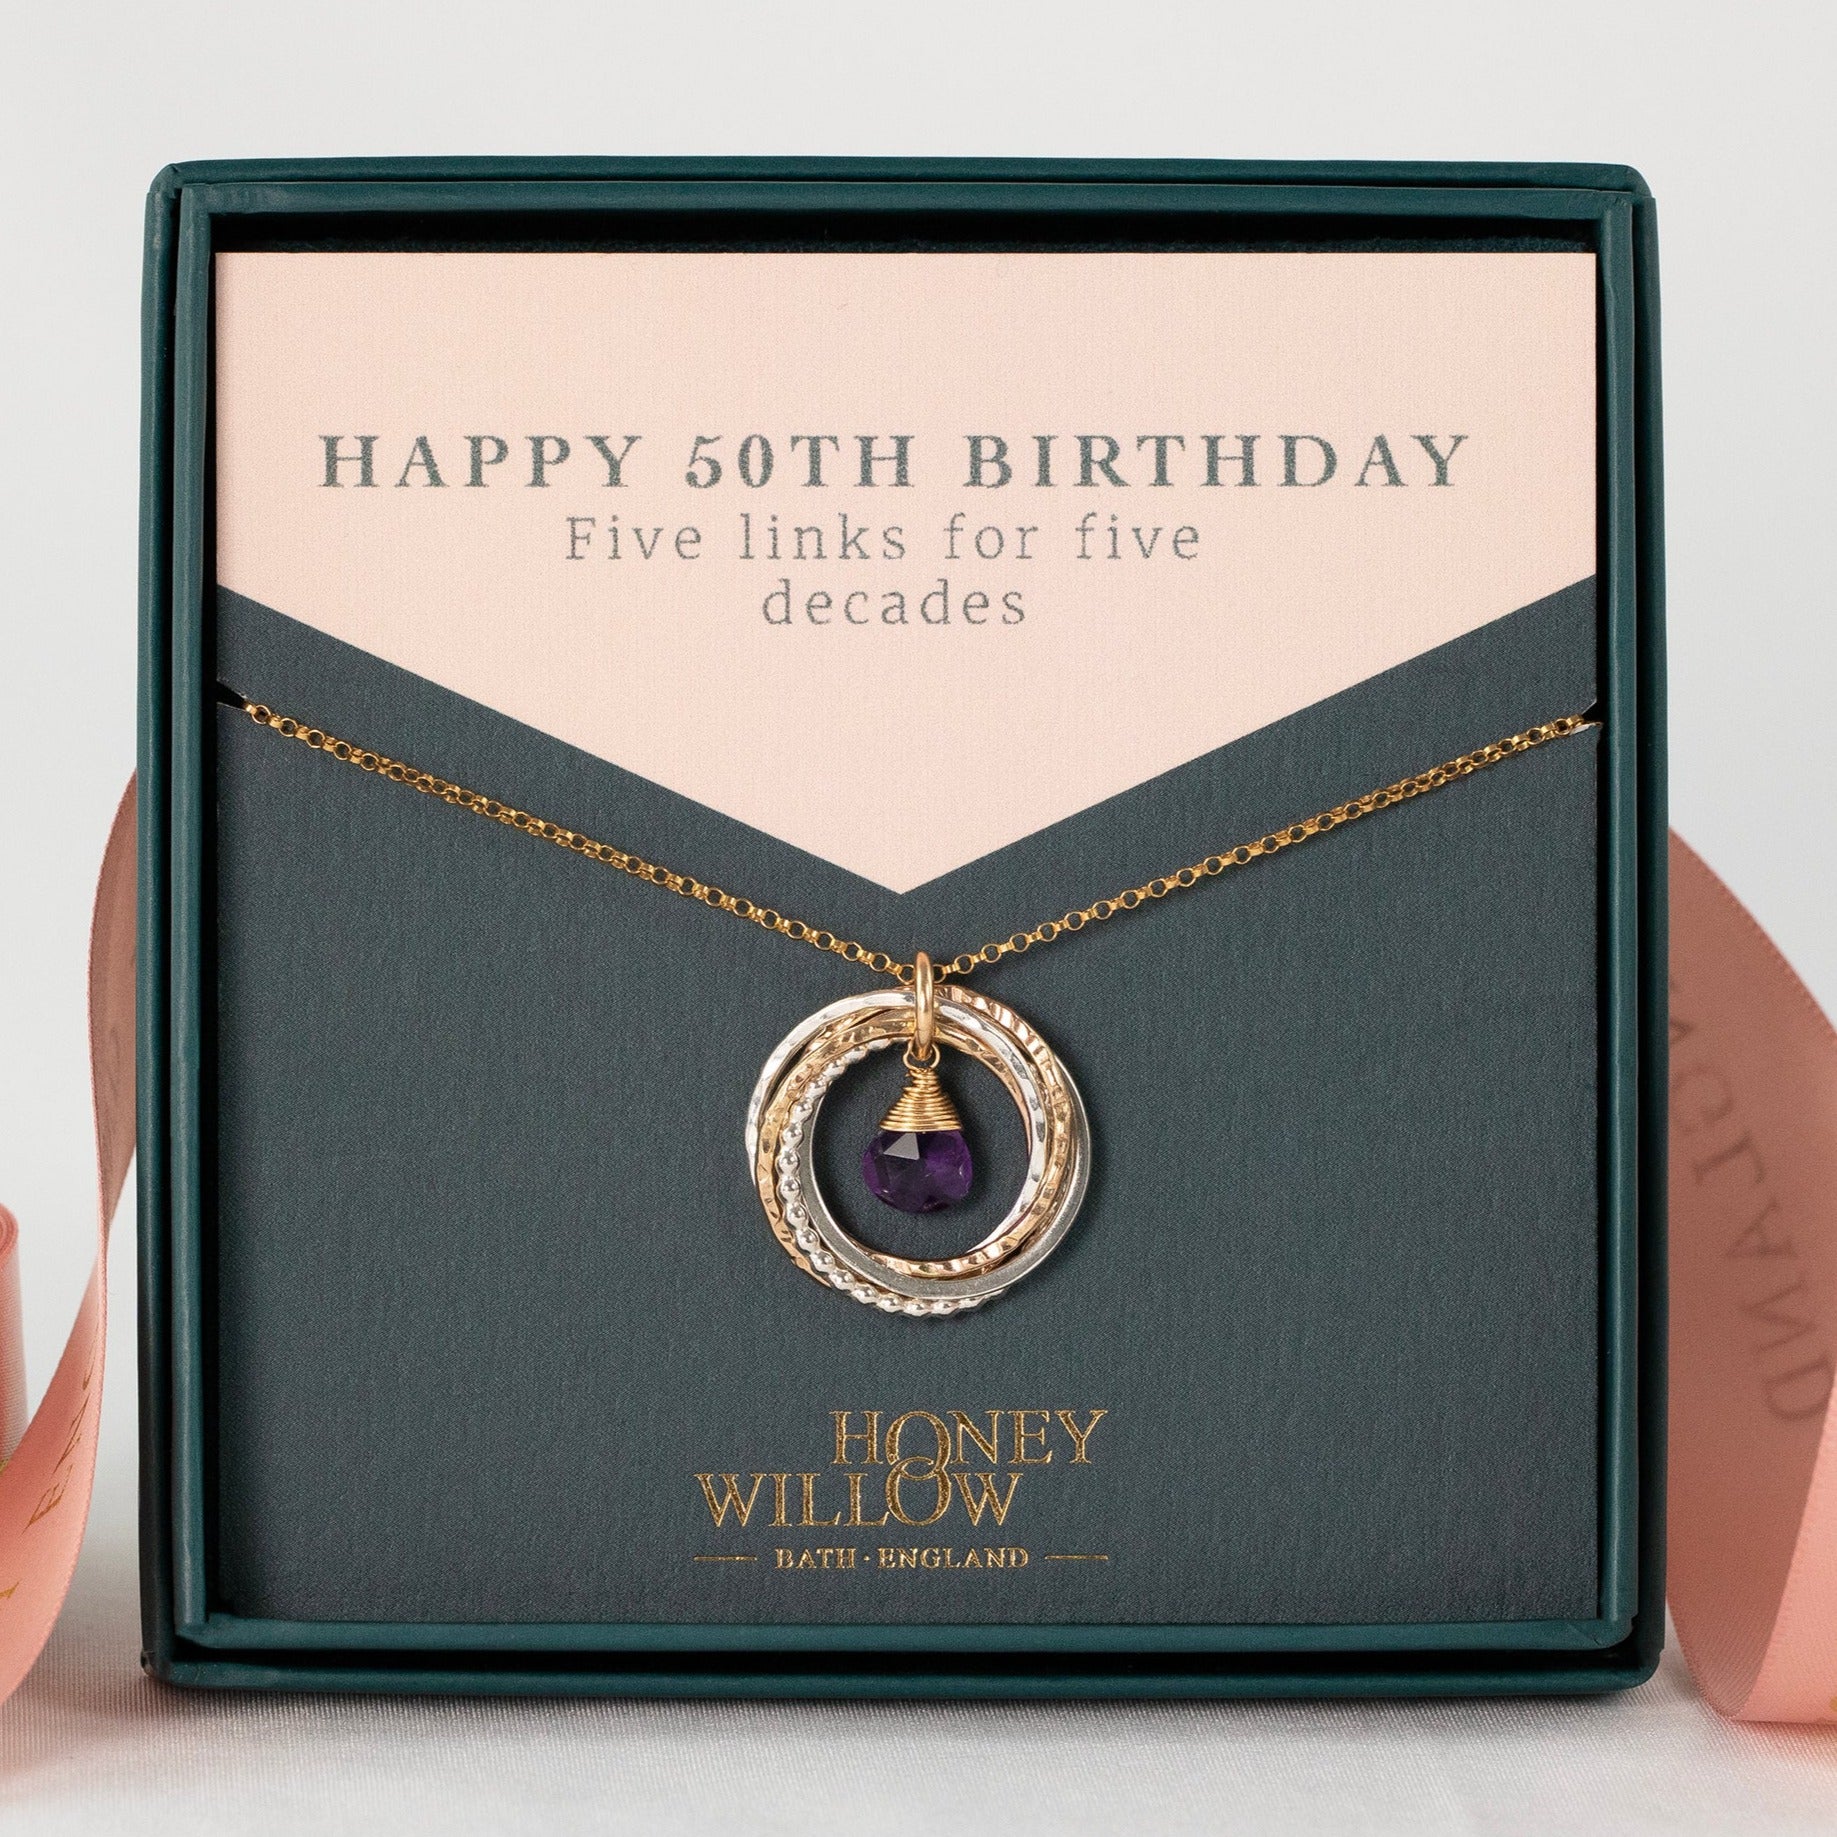 50th Birthday Birthstone Necklace - The Original 5 Links for 5 Decades Necklace - Silver & Gold